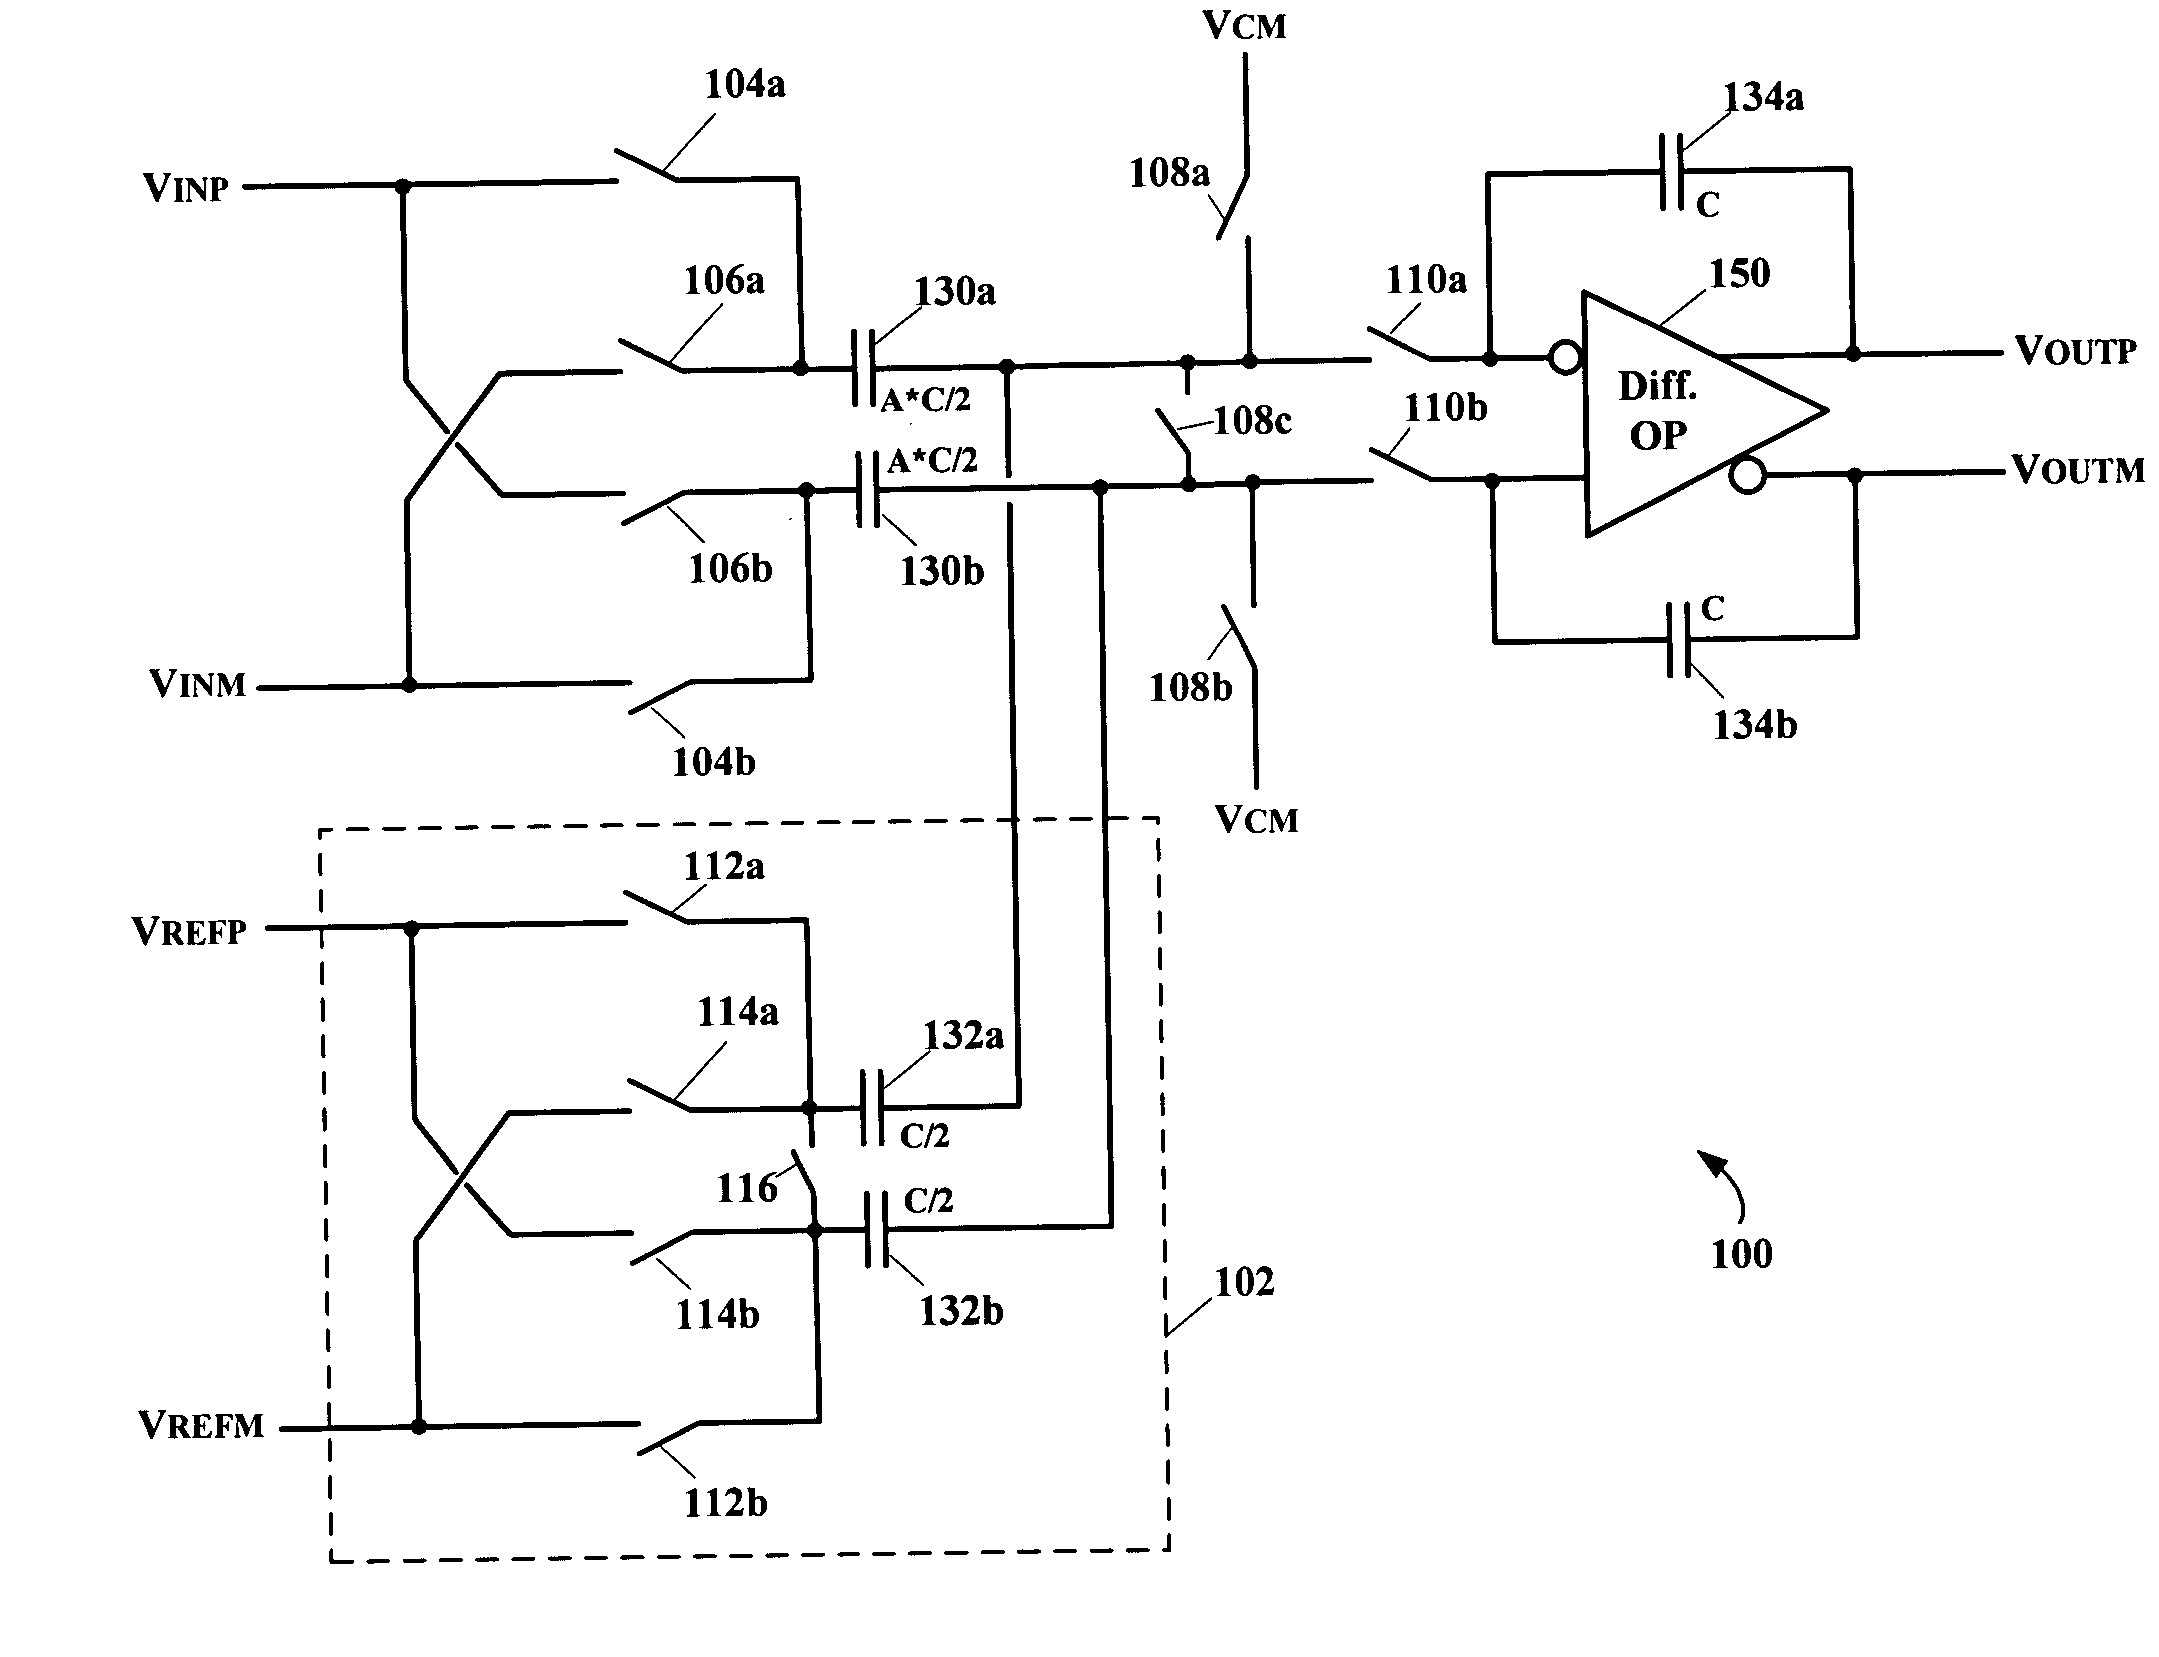 Five-level feed-back digital-to-analog converter for a switched capacitor sigma-delta analog-to-digital converter